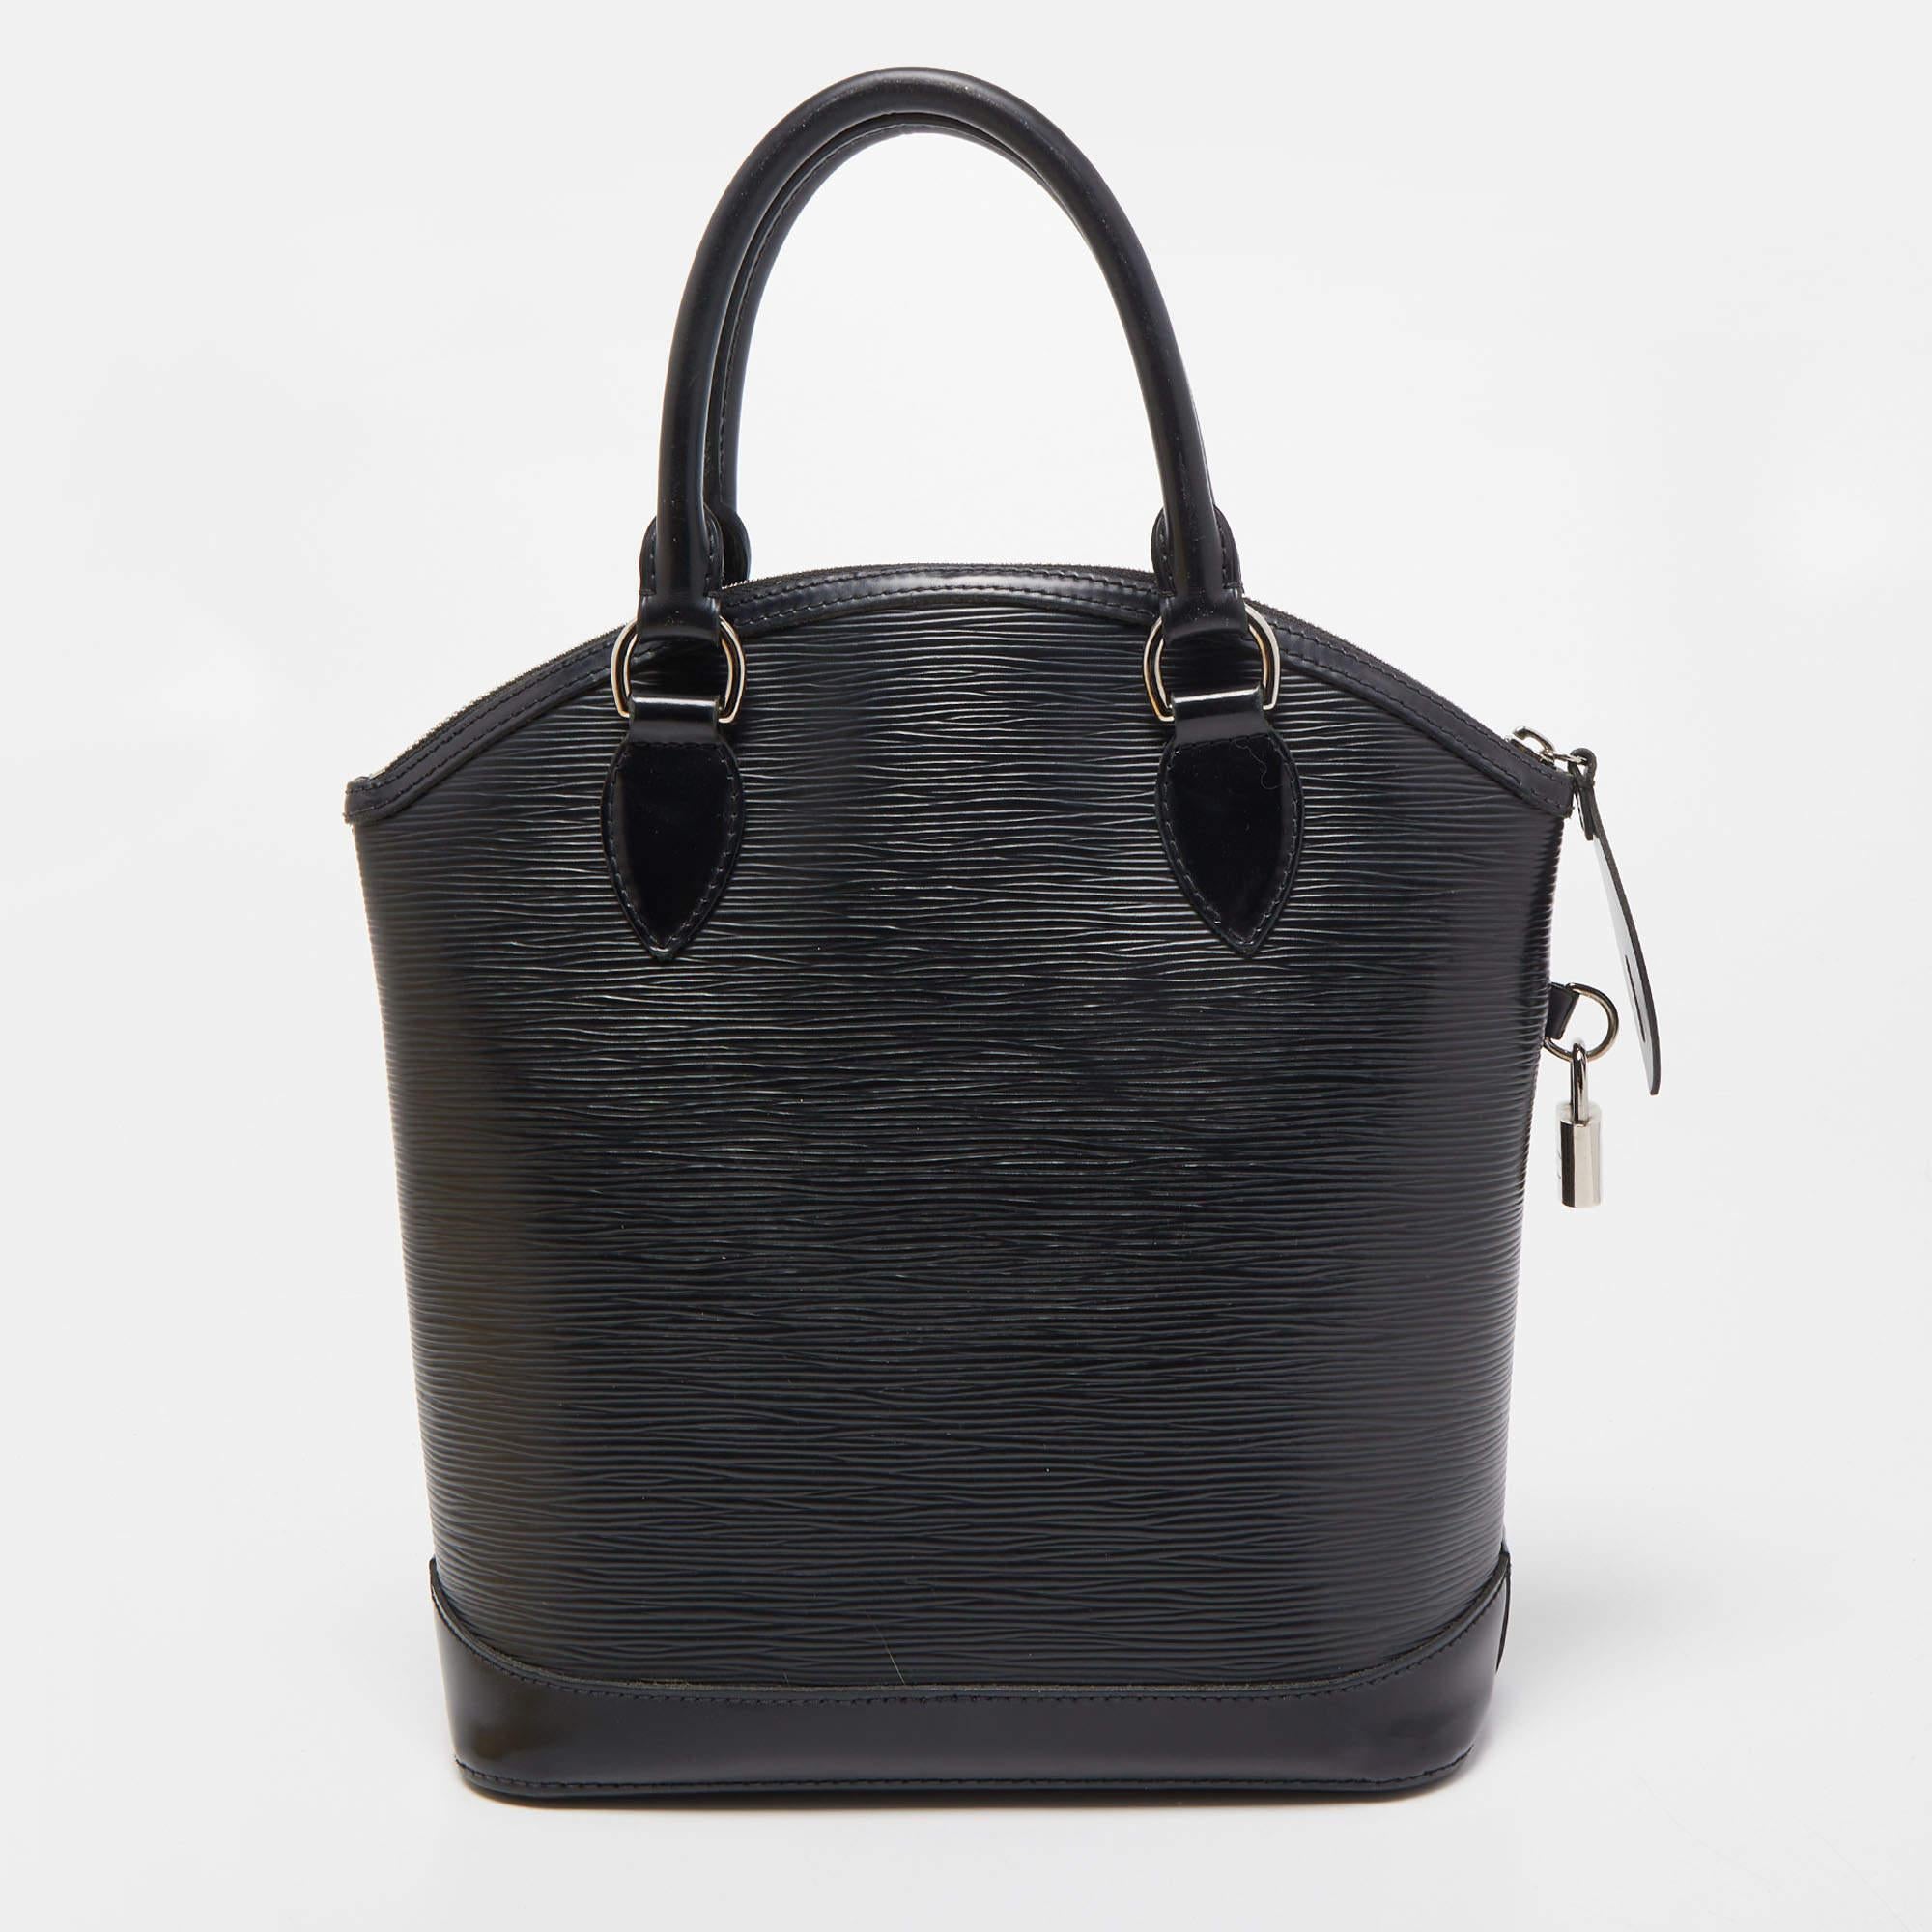 Displaying exquisite craftsmanship, this fabulous bag will certainly live up to your expectations. Featuring a chic design, it is made from luxe materials and has an interior for carrying your little essentials.

Includes: Original Dustbag, Padlock